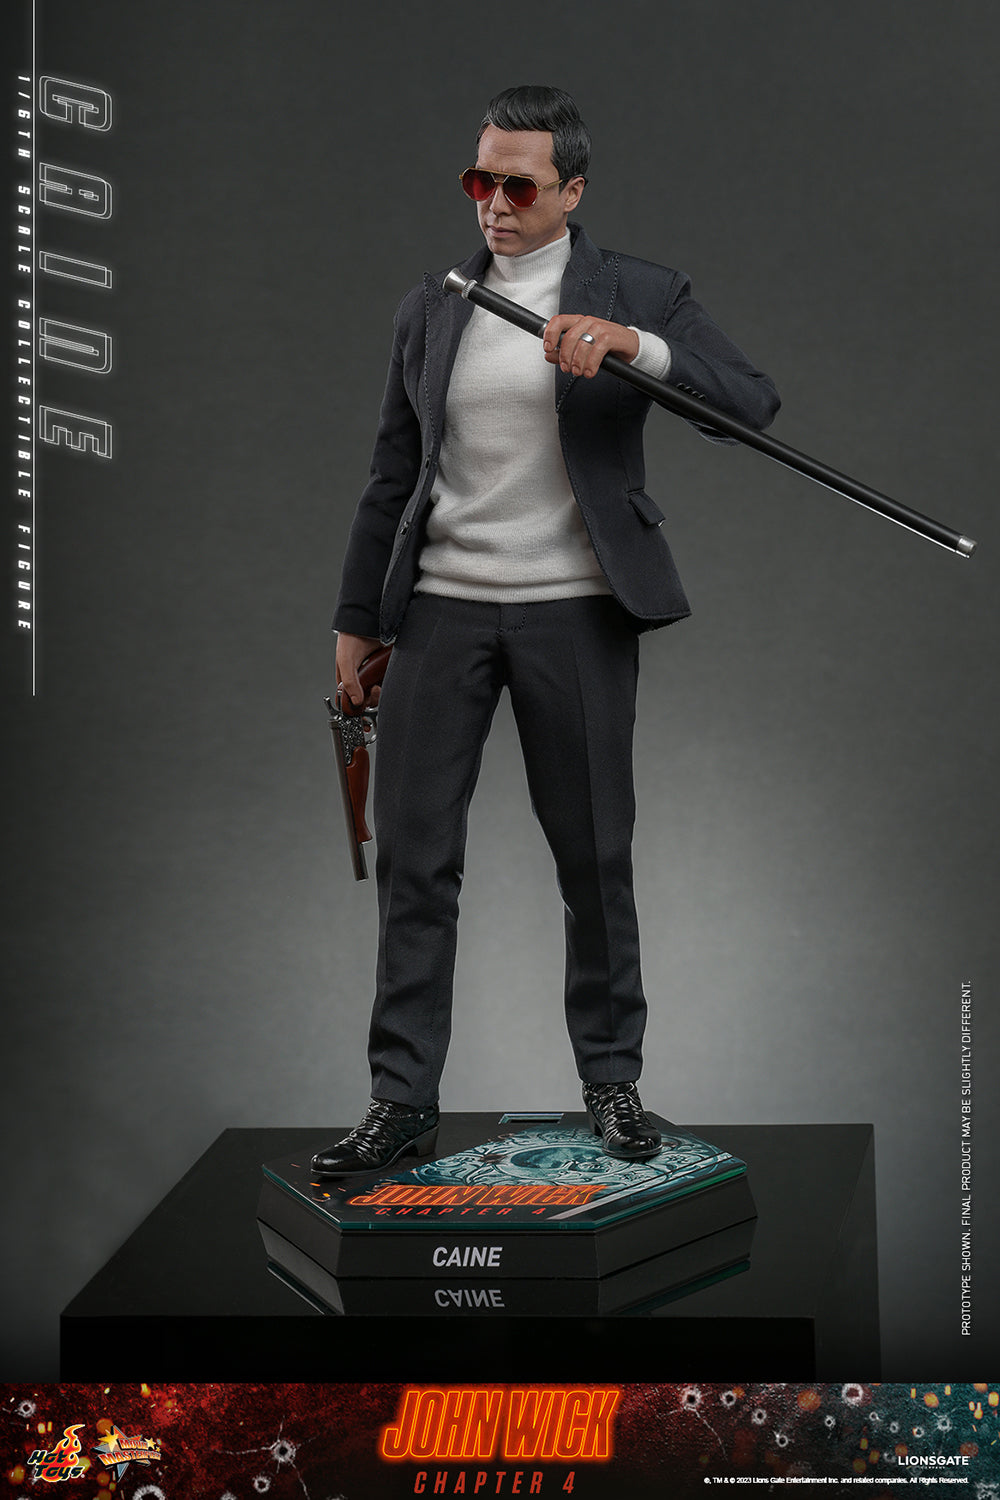 Caine: John Wick Chapter 4: Hot Toys: Hot Toys